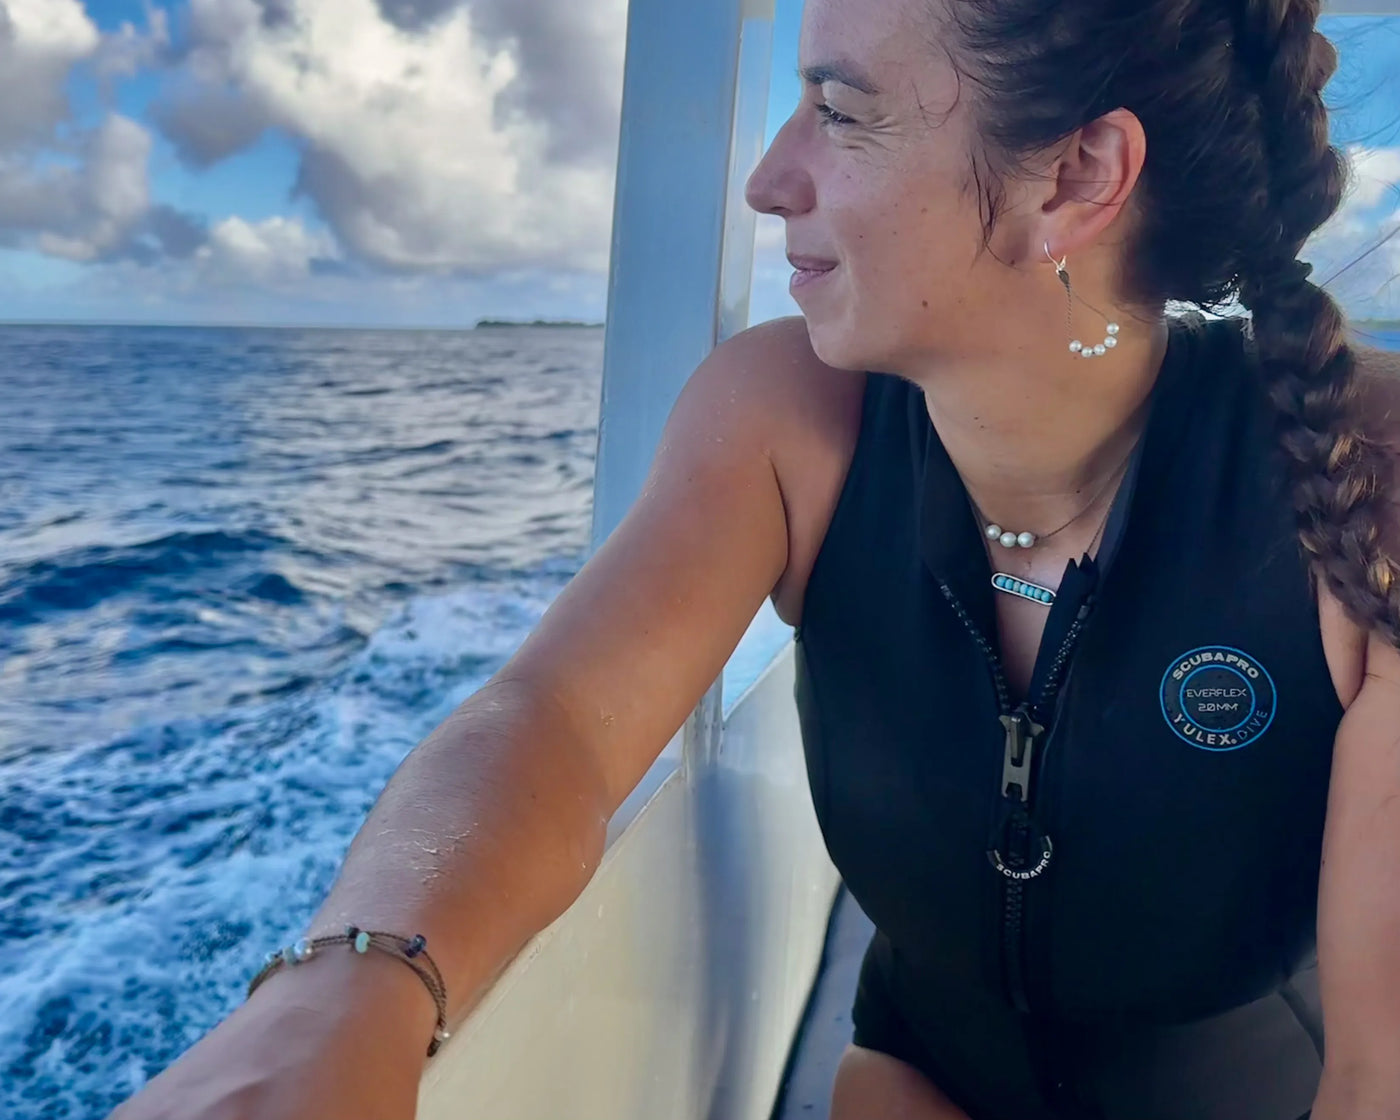 Seven Seas bracelet on PADI scuba diver on boat looking out over the ocean